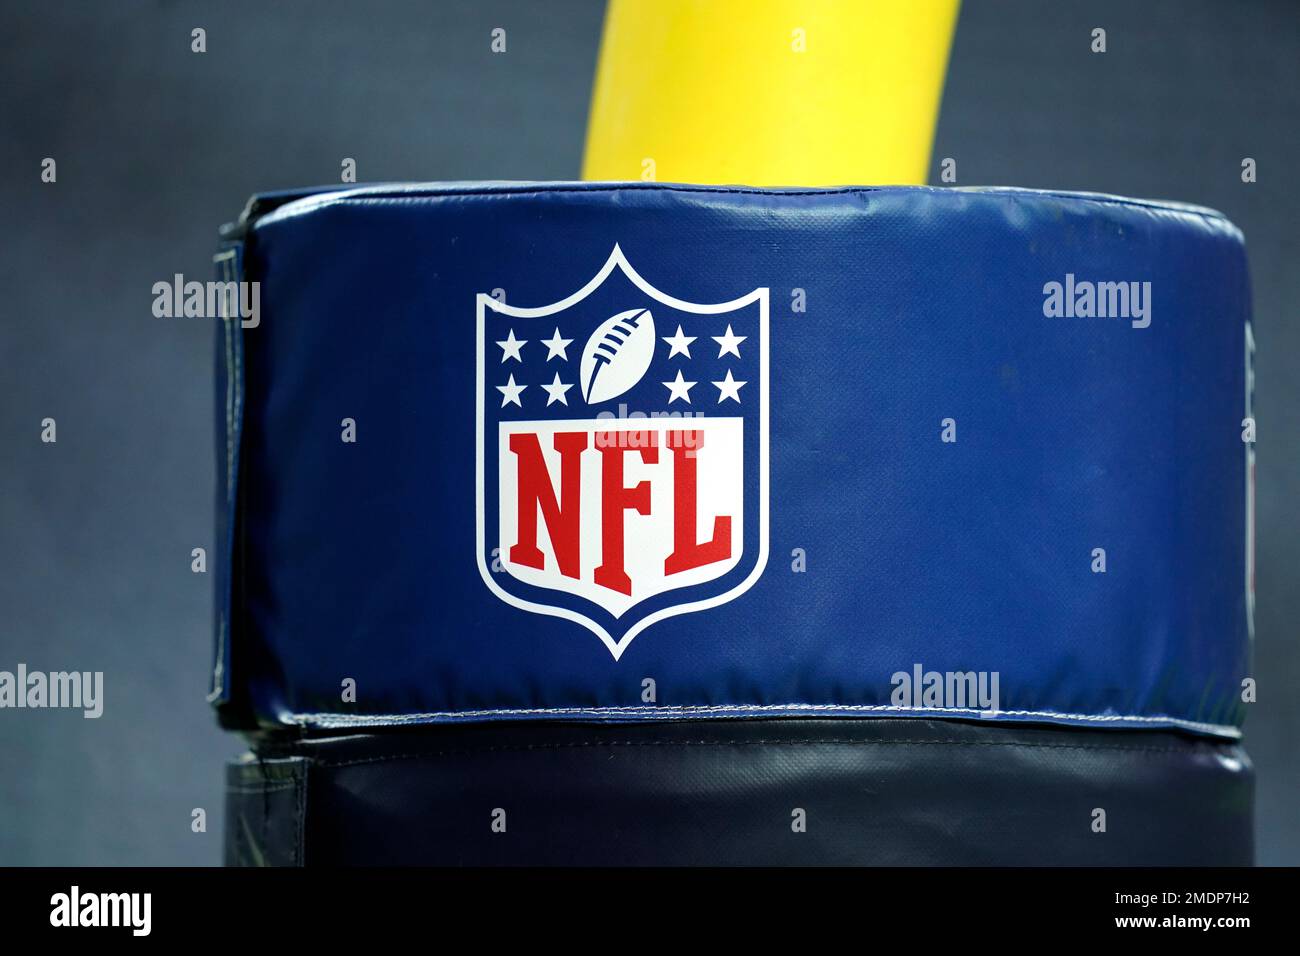 The NFL shield logo is seen on a goal post before an NFL preseason